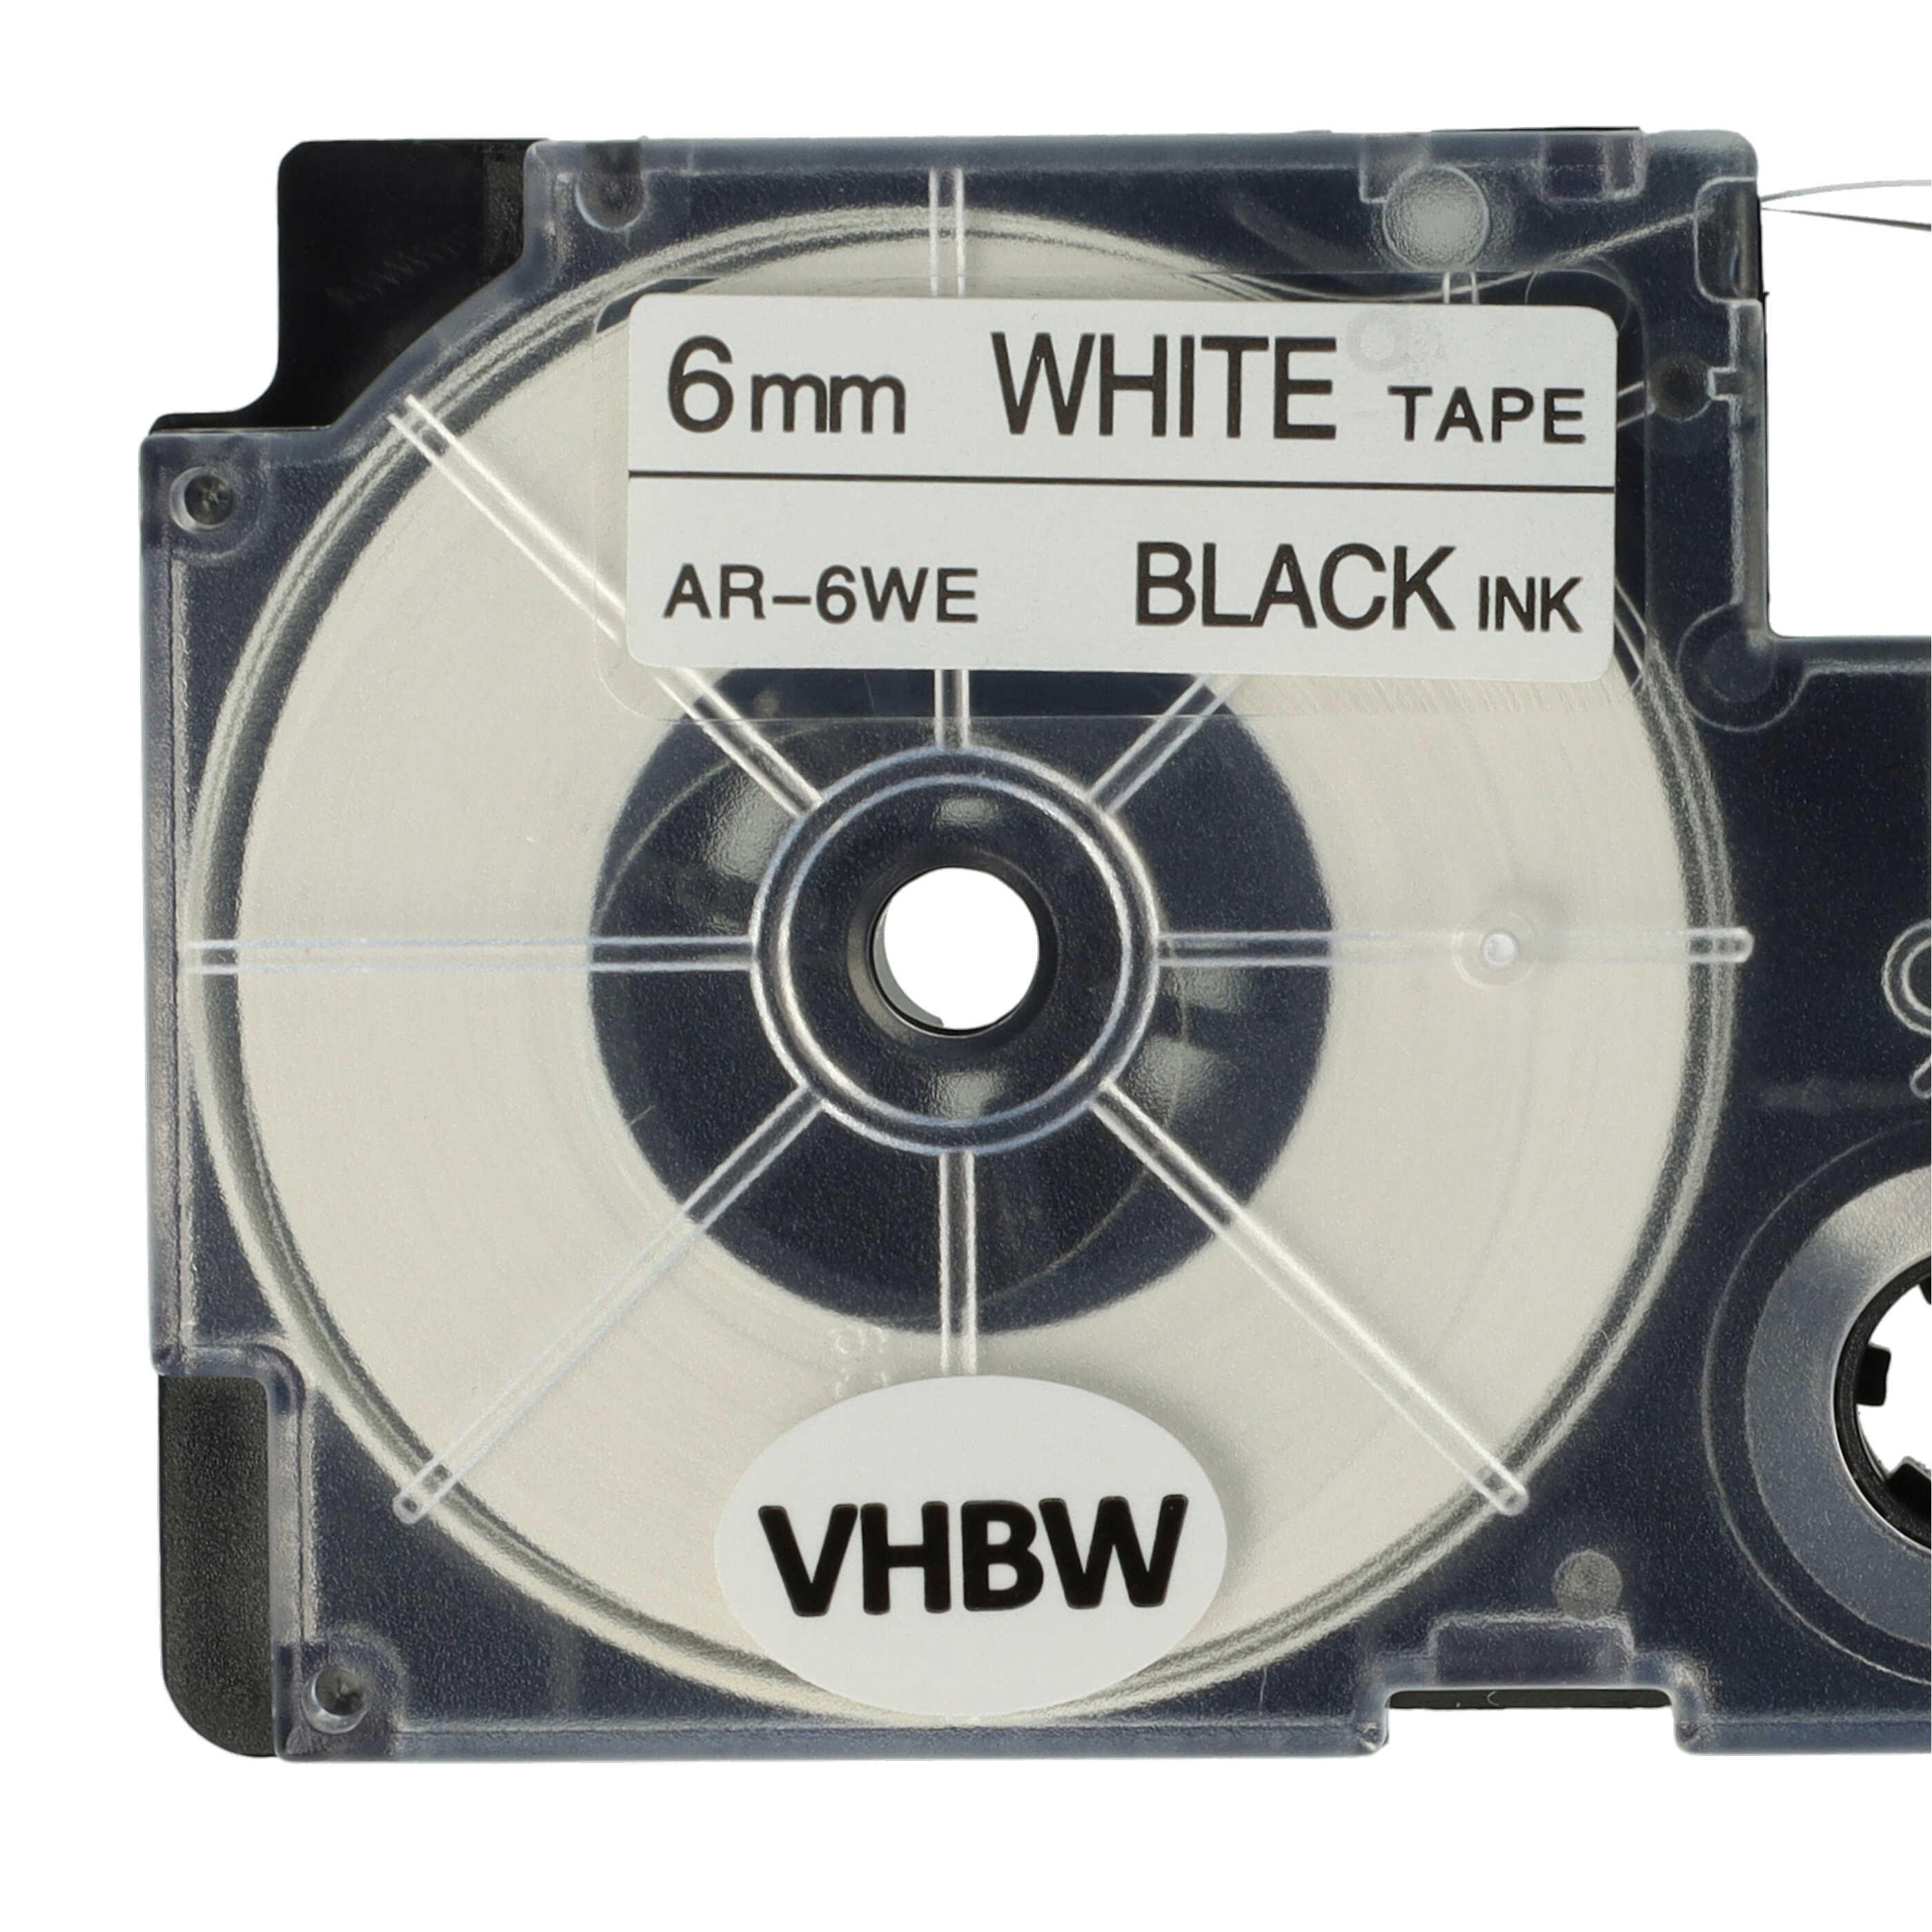 10x Label Tape as Replacement for Casio XR-6WE1, XR-6WE - 6 mm Black to White